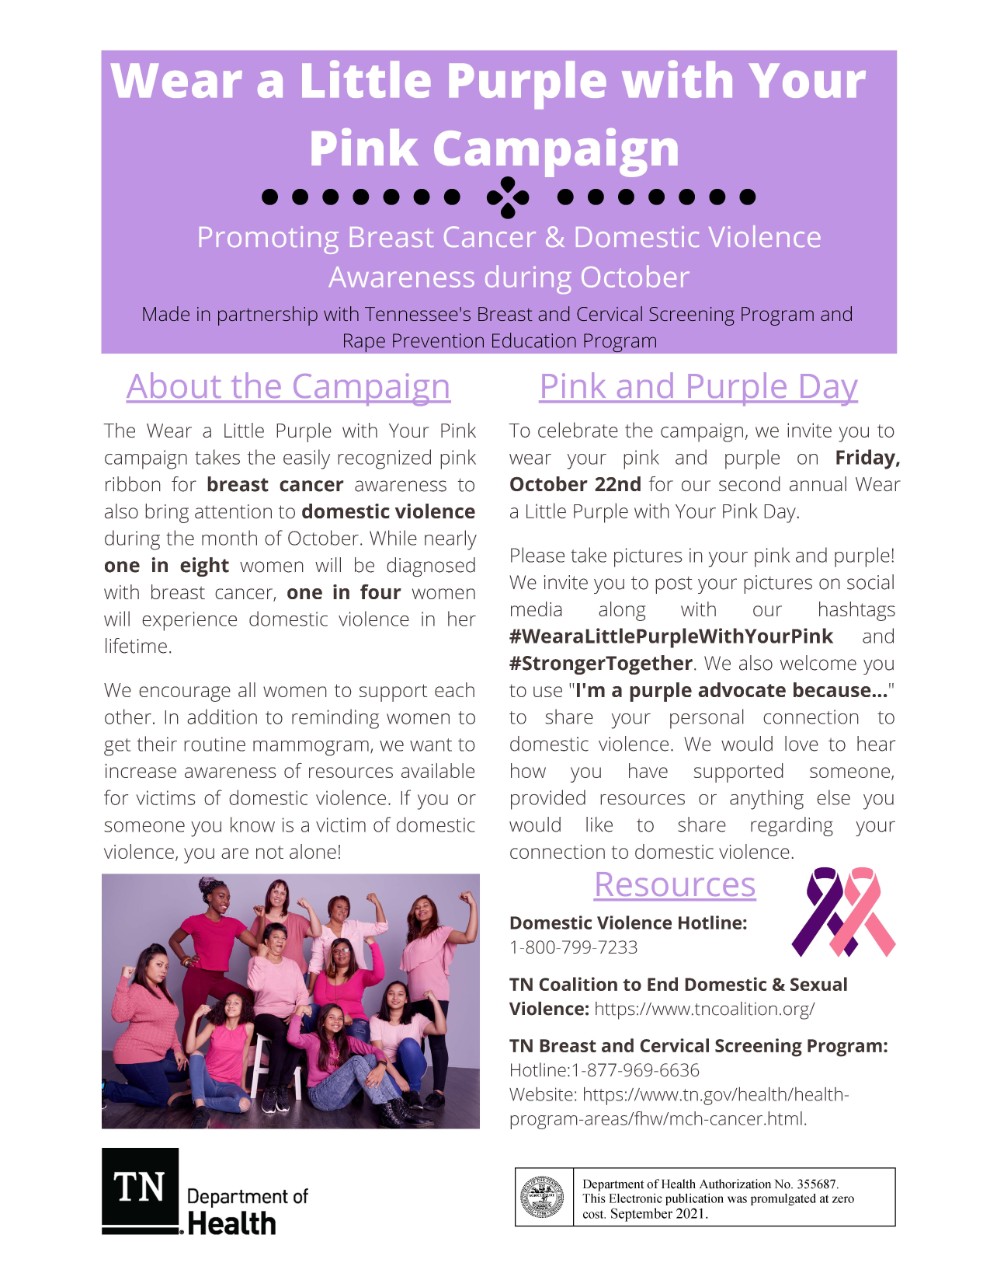 Wear-a-Little-Purple-with-Your-Pink-flyer-2021